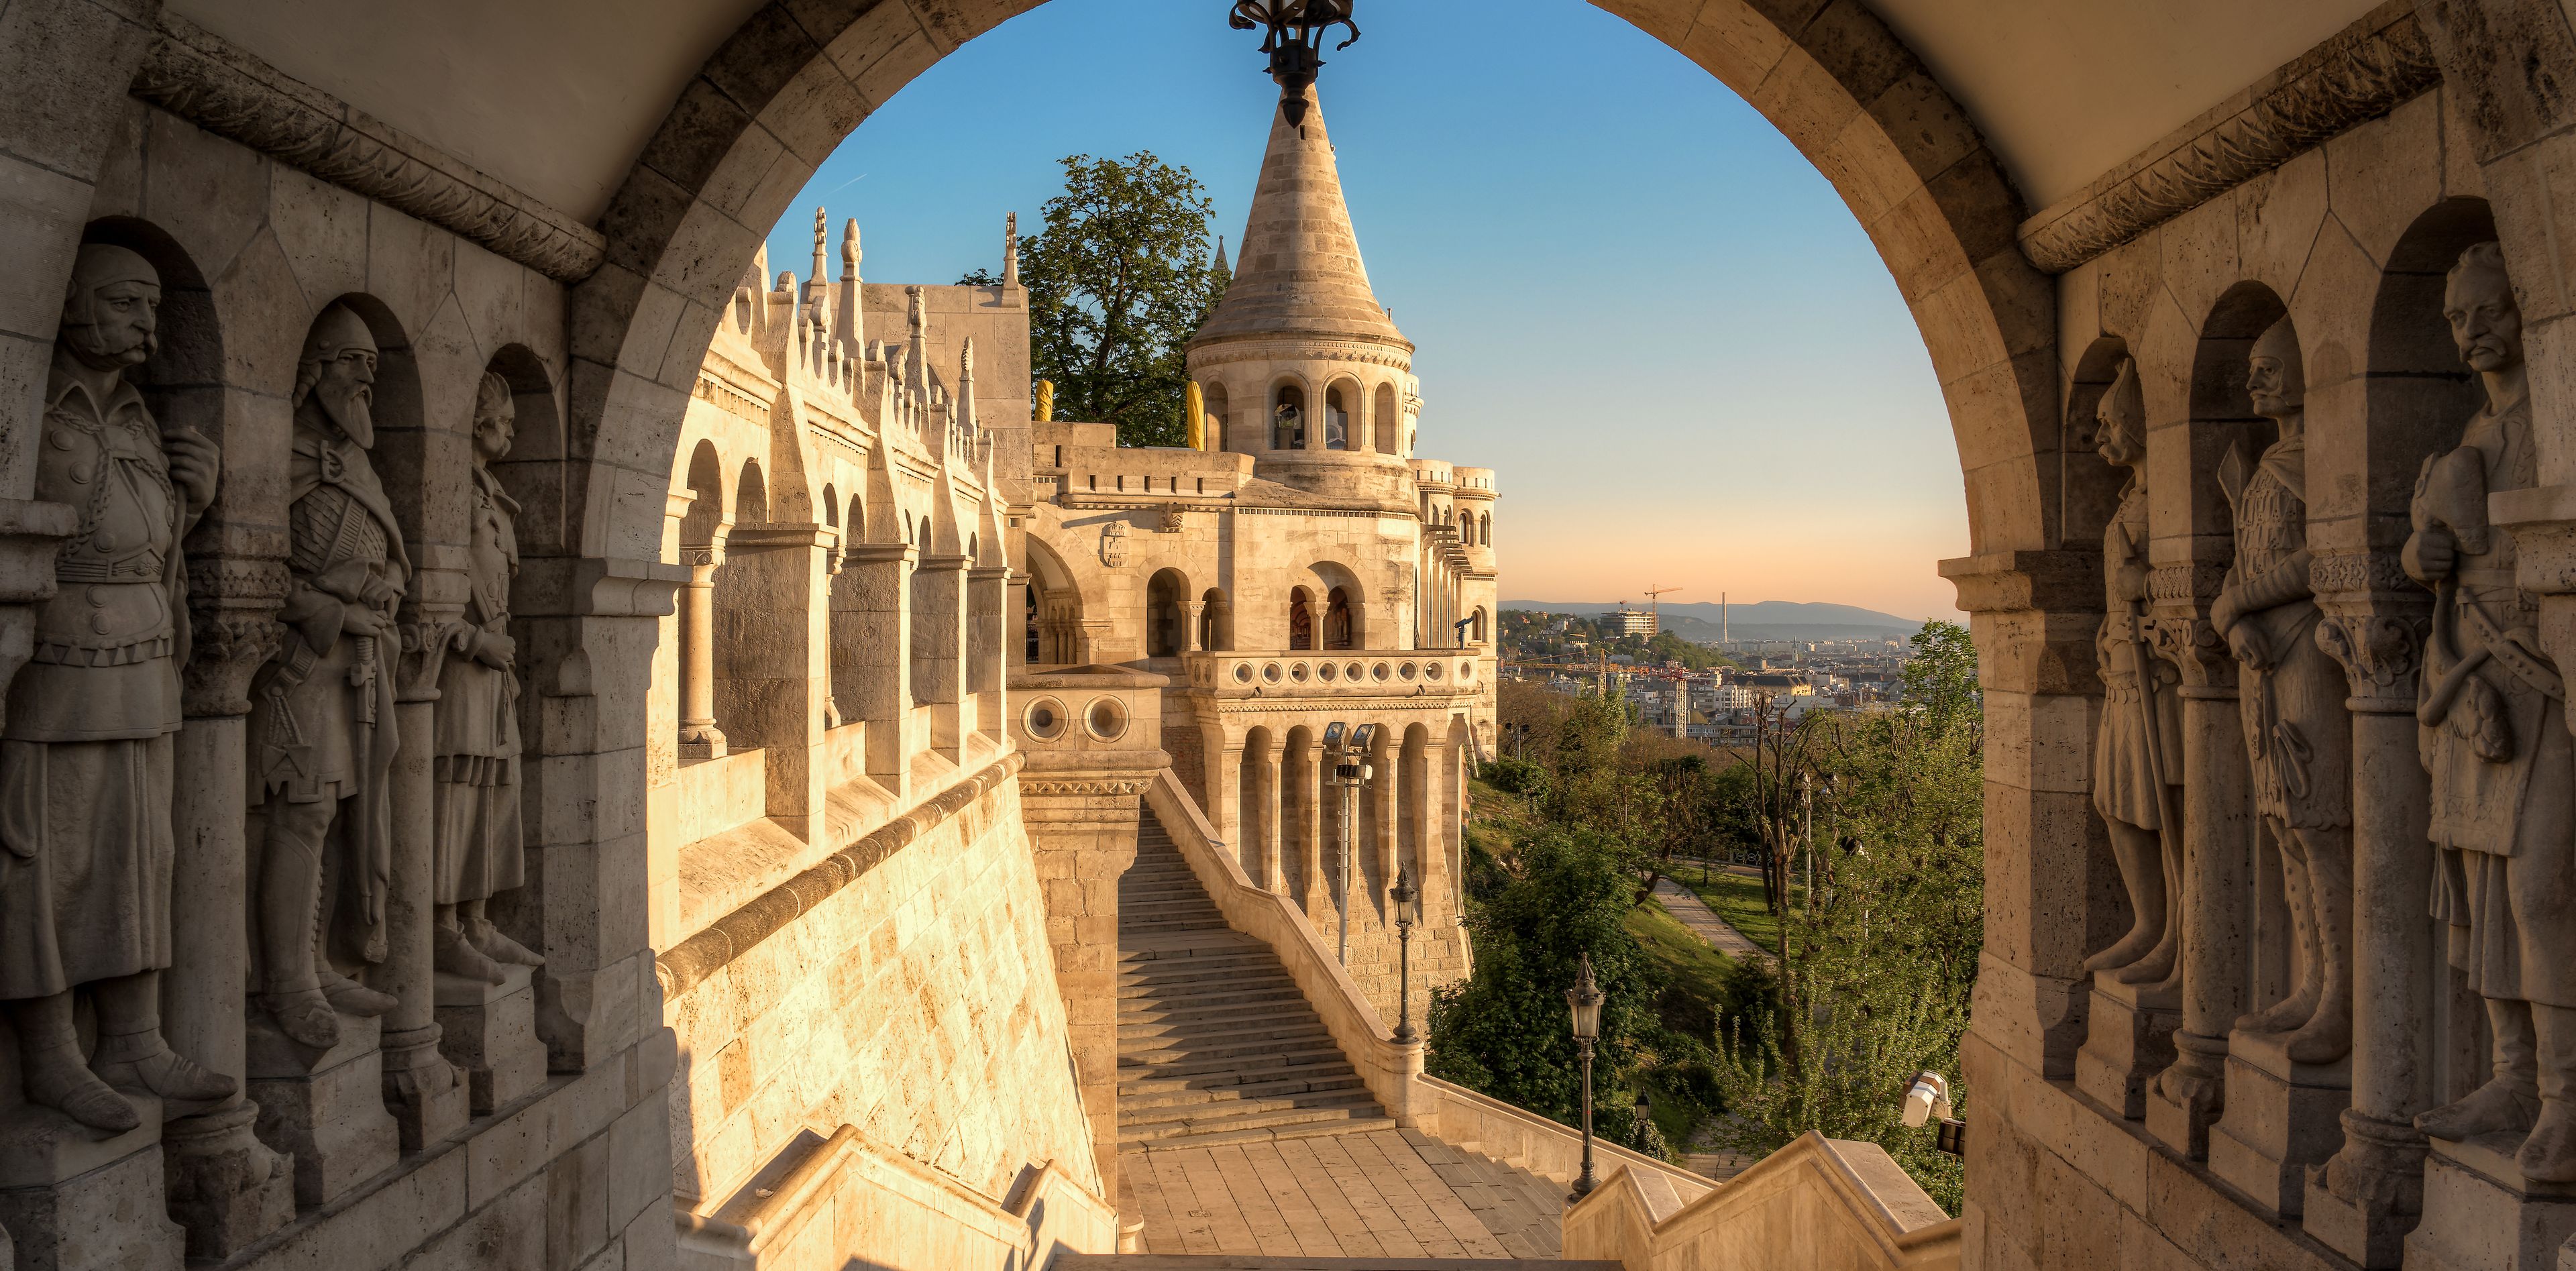 The Fishermen's Bastion in Budapest, Hungary